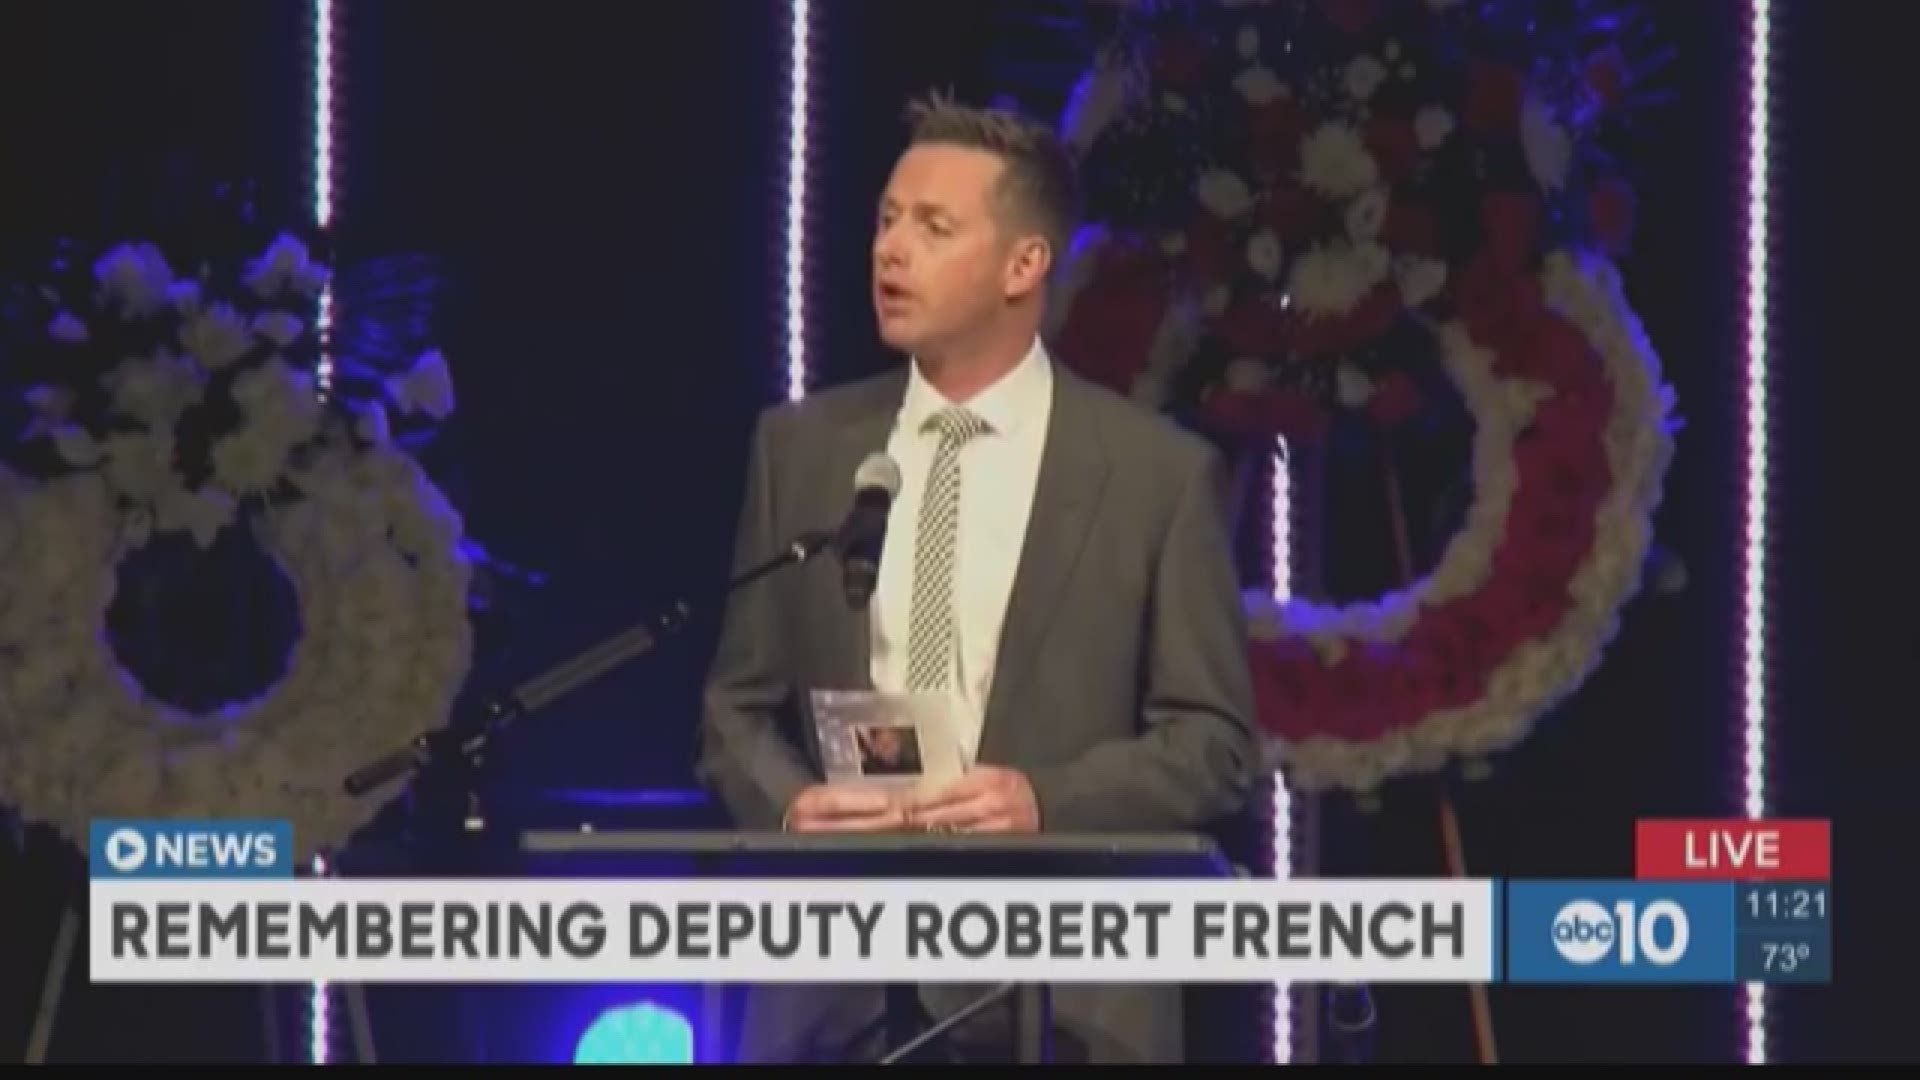 Thousands gathered at Bayside Church Adventure in Roseville to pay respect to Deputy Robert French